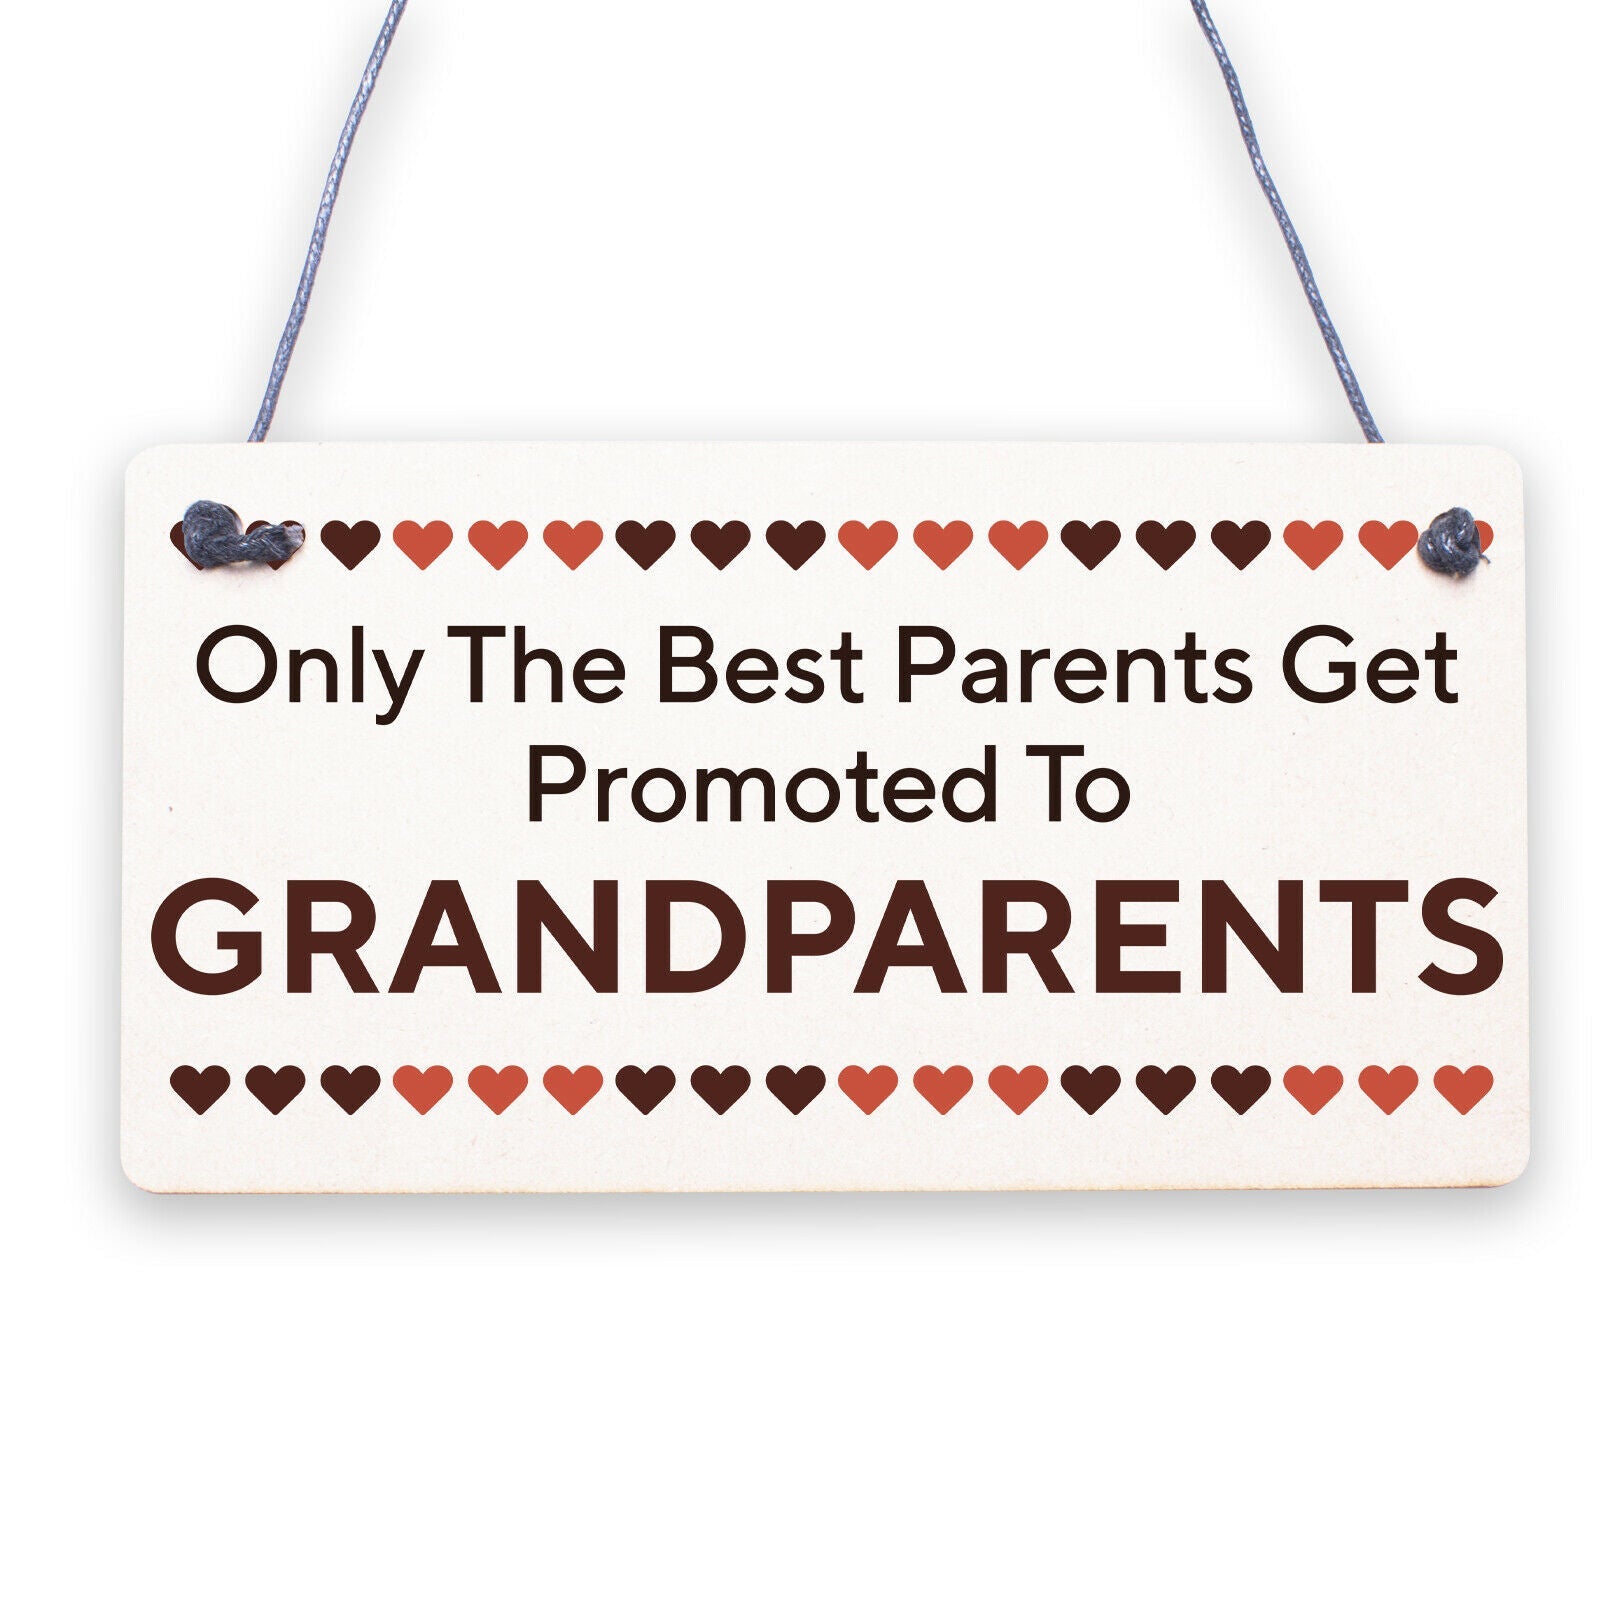 Only The Best Parents Get Promoted To Grandparents Wooden Plaque Sign Love Gift